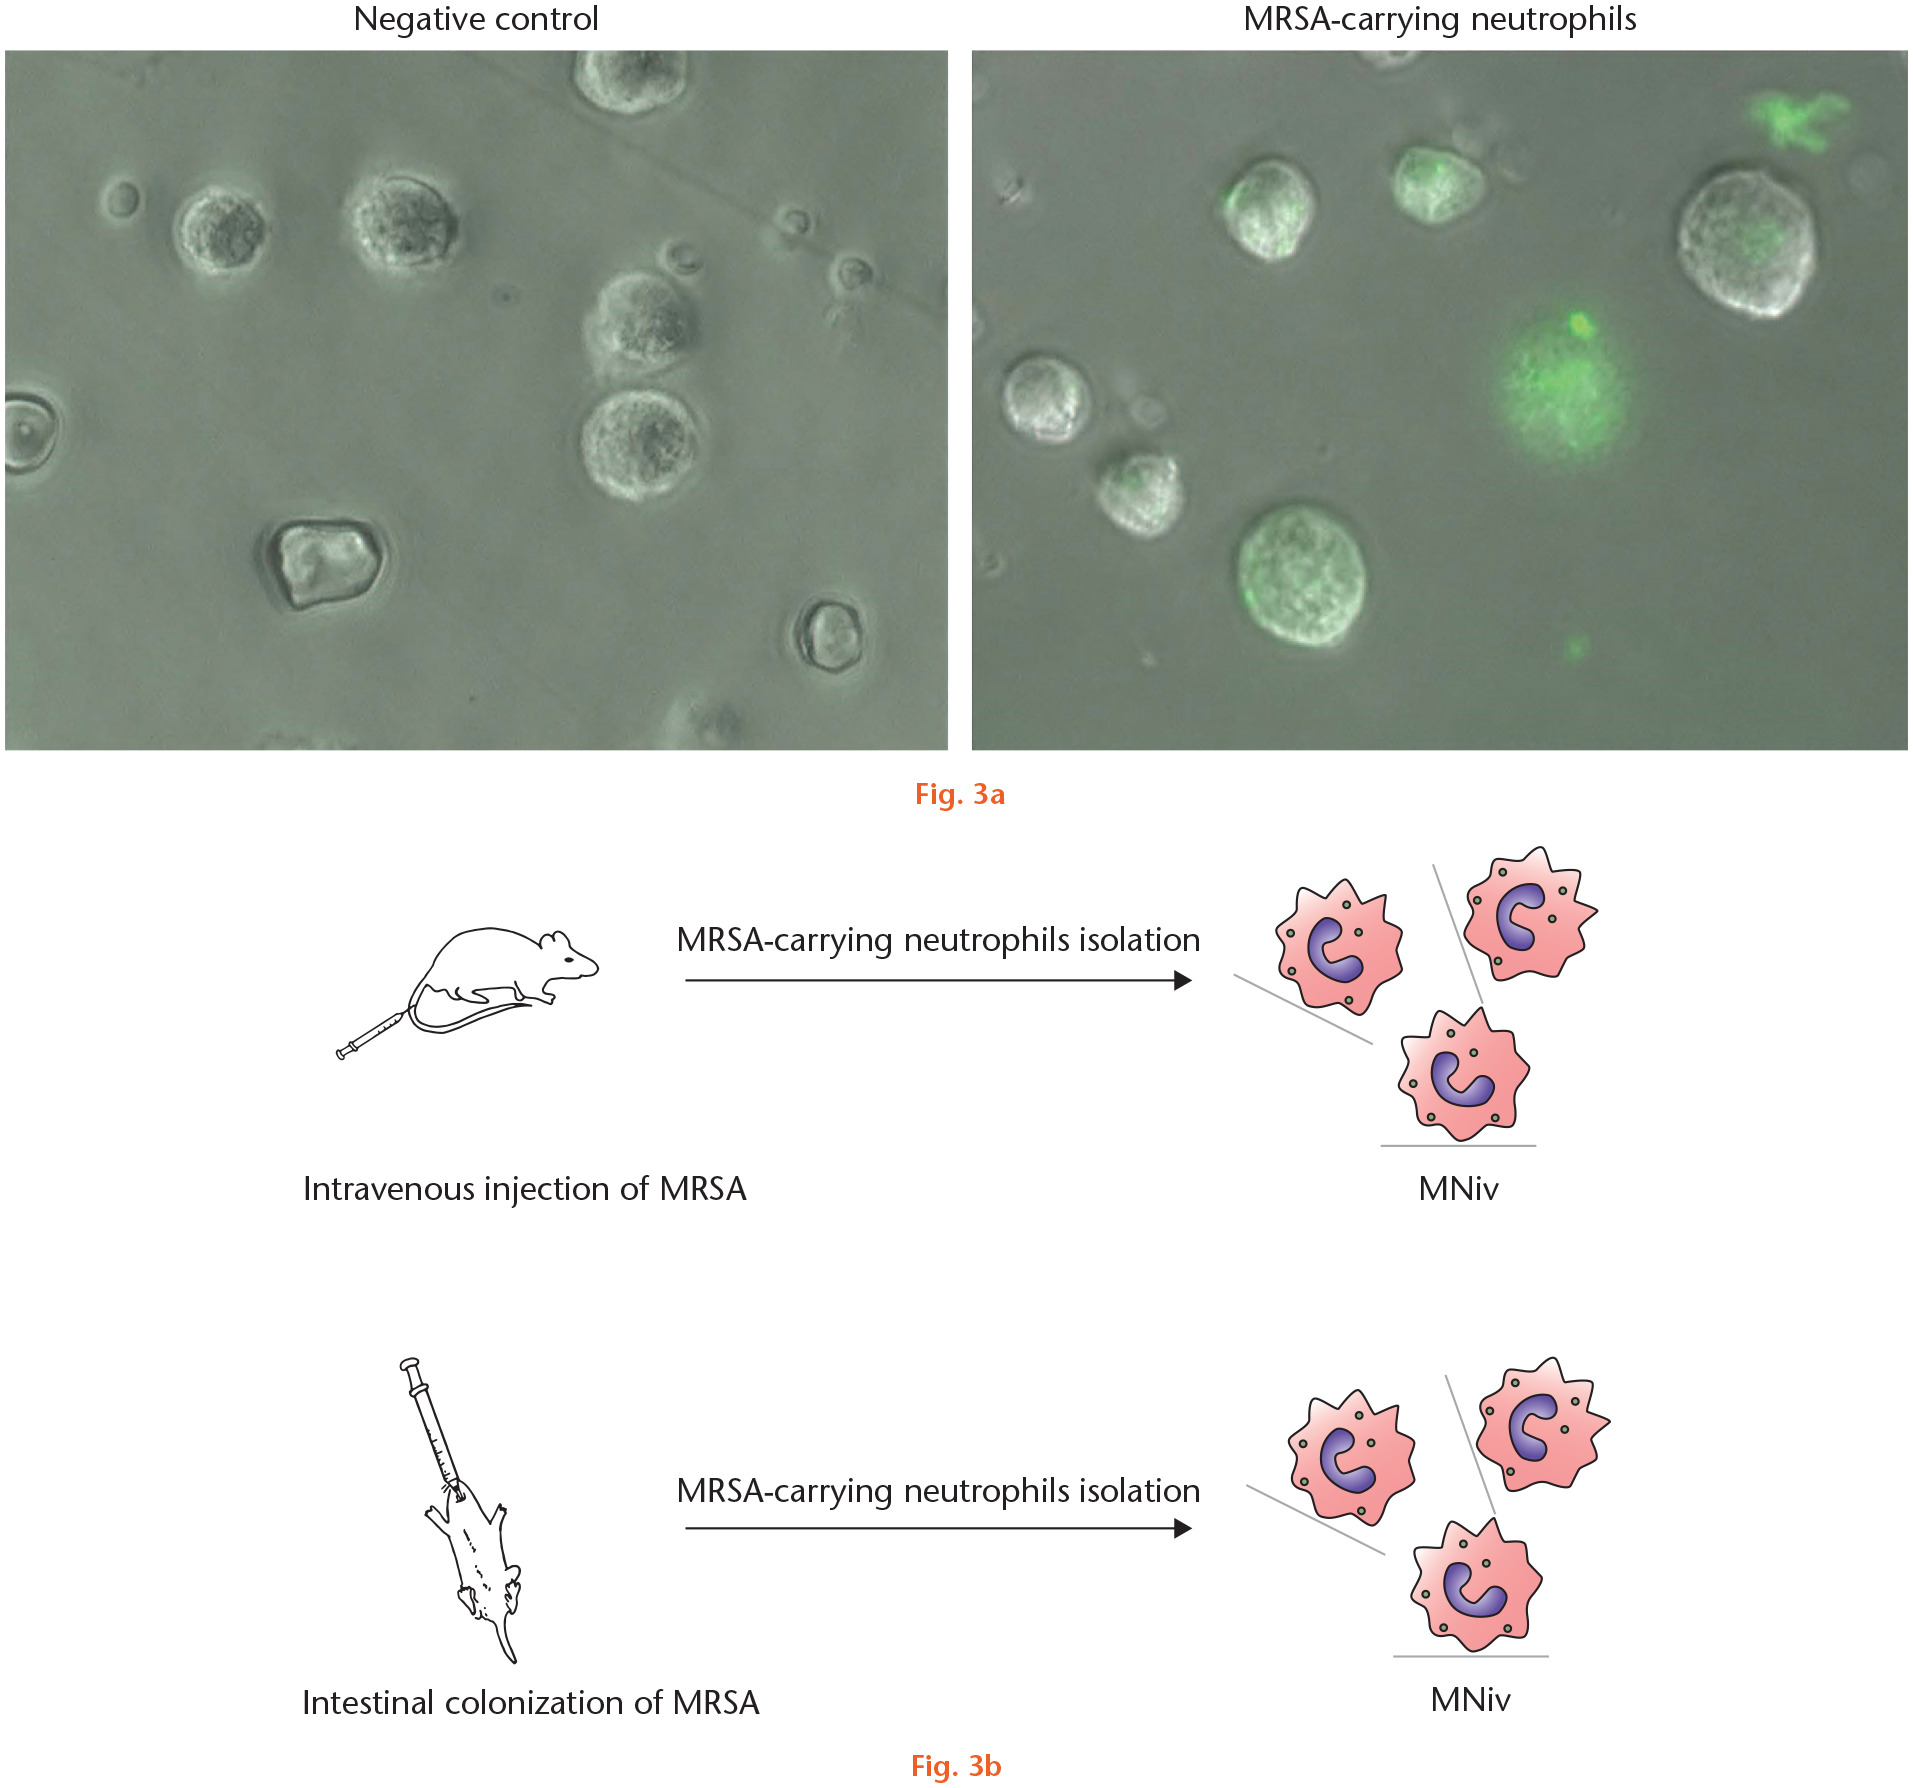 Fig. 3 
            a) A representative image of green fluorescent protein (GFP)-positive neutrophils after flow cytometry isolation. GFP-negative cells obtained from isolation were used as control. b) Schematic definitions of methicillin-resistant Staphylococcus aureus (MRSA)-carrying neutrophils isolated from other rats injected intravenously with MRSA (MNiv) and MRSA-carrying neutrophils isolated from other rats that had undergone intestinal MRSA colonization (MNin).
          